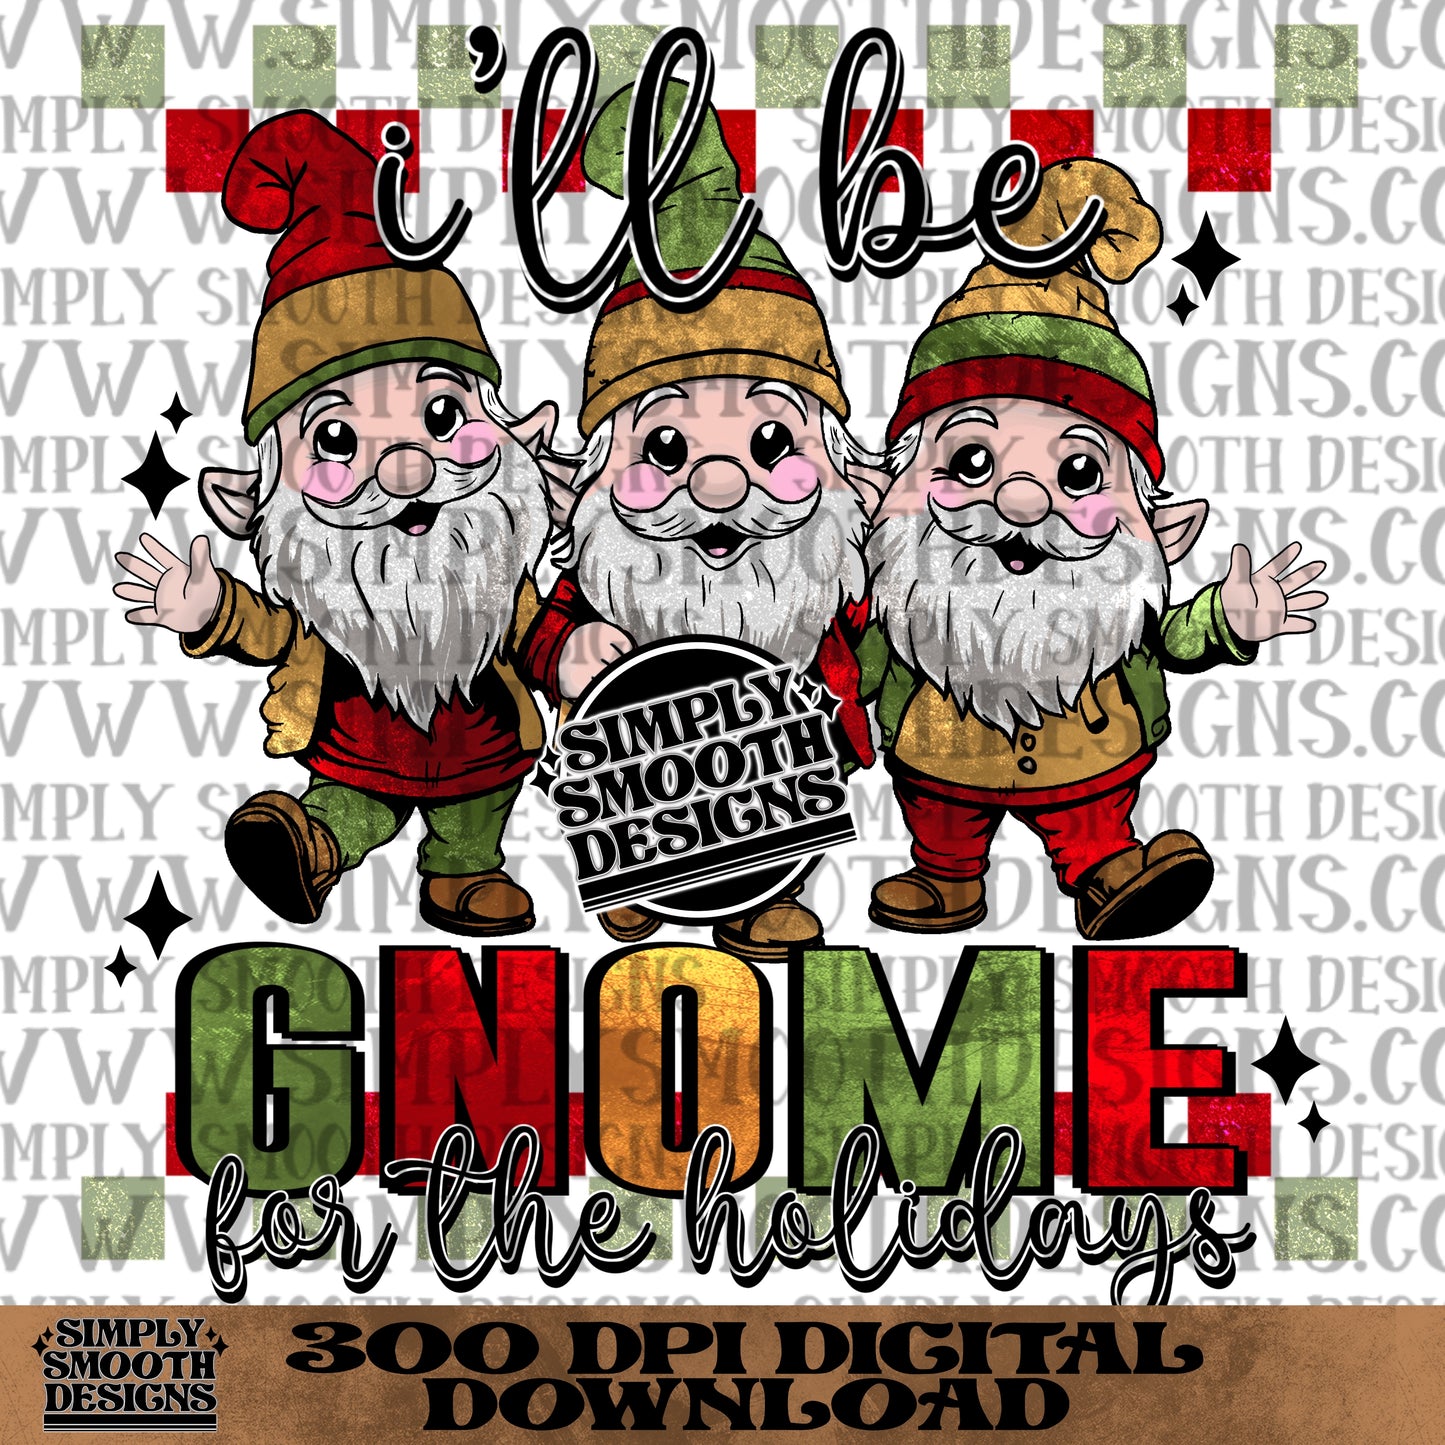 I’ll be gnome for Christmas